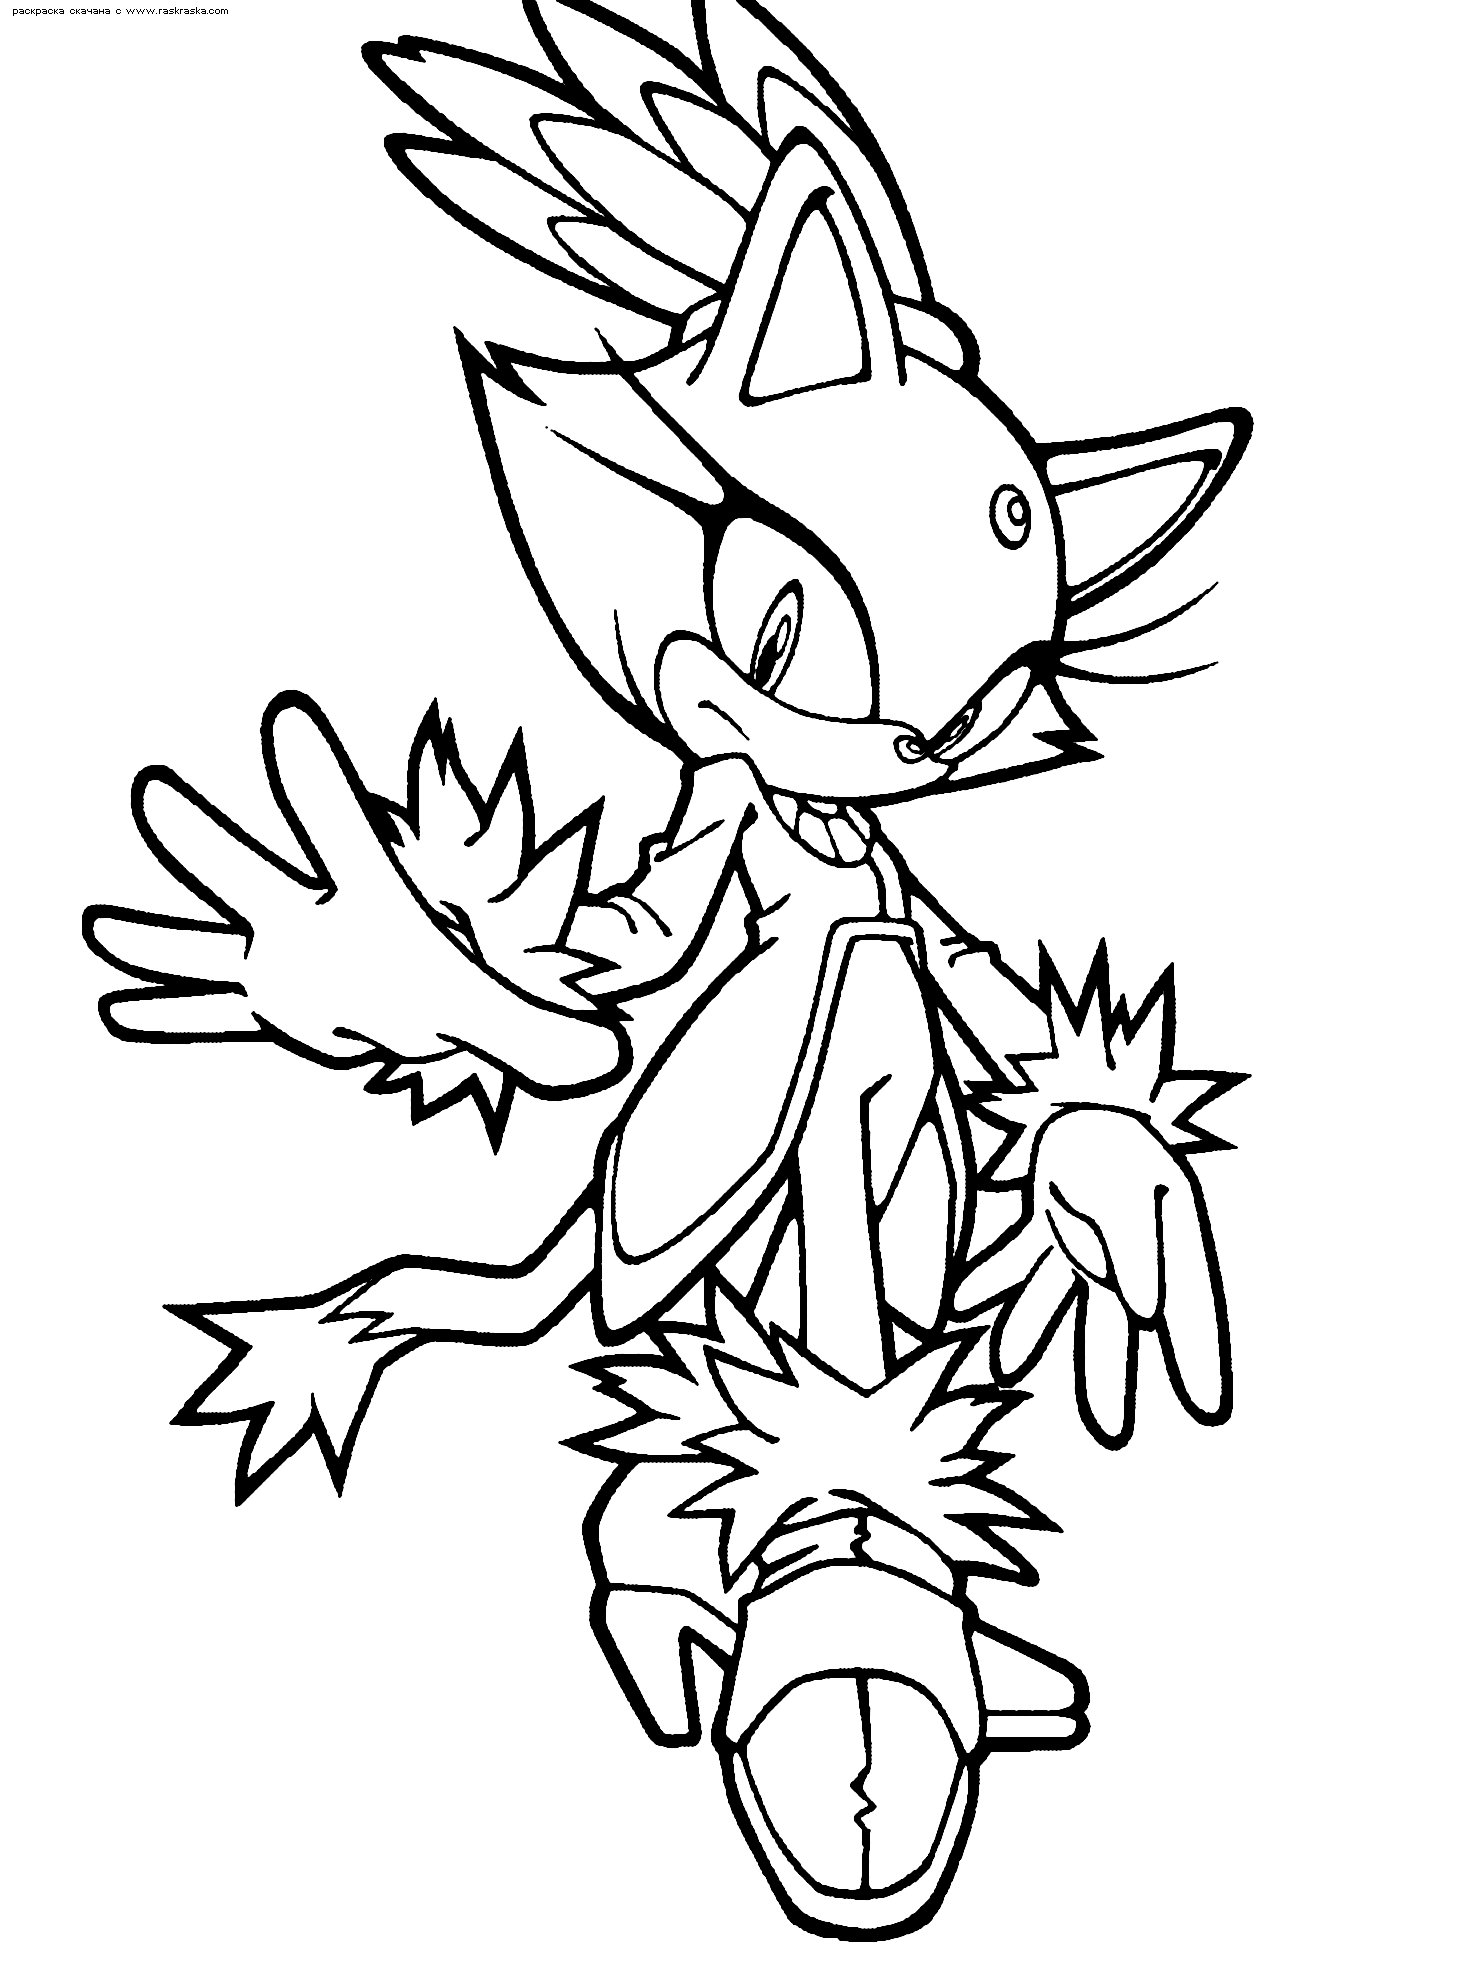 Sonic Coloring Pages (3) - Coloringkids.org